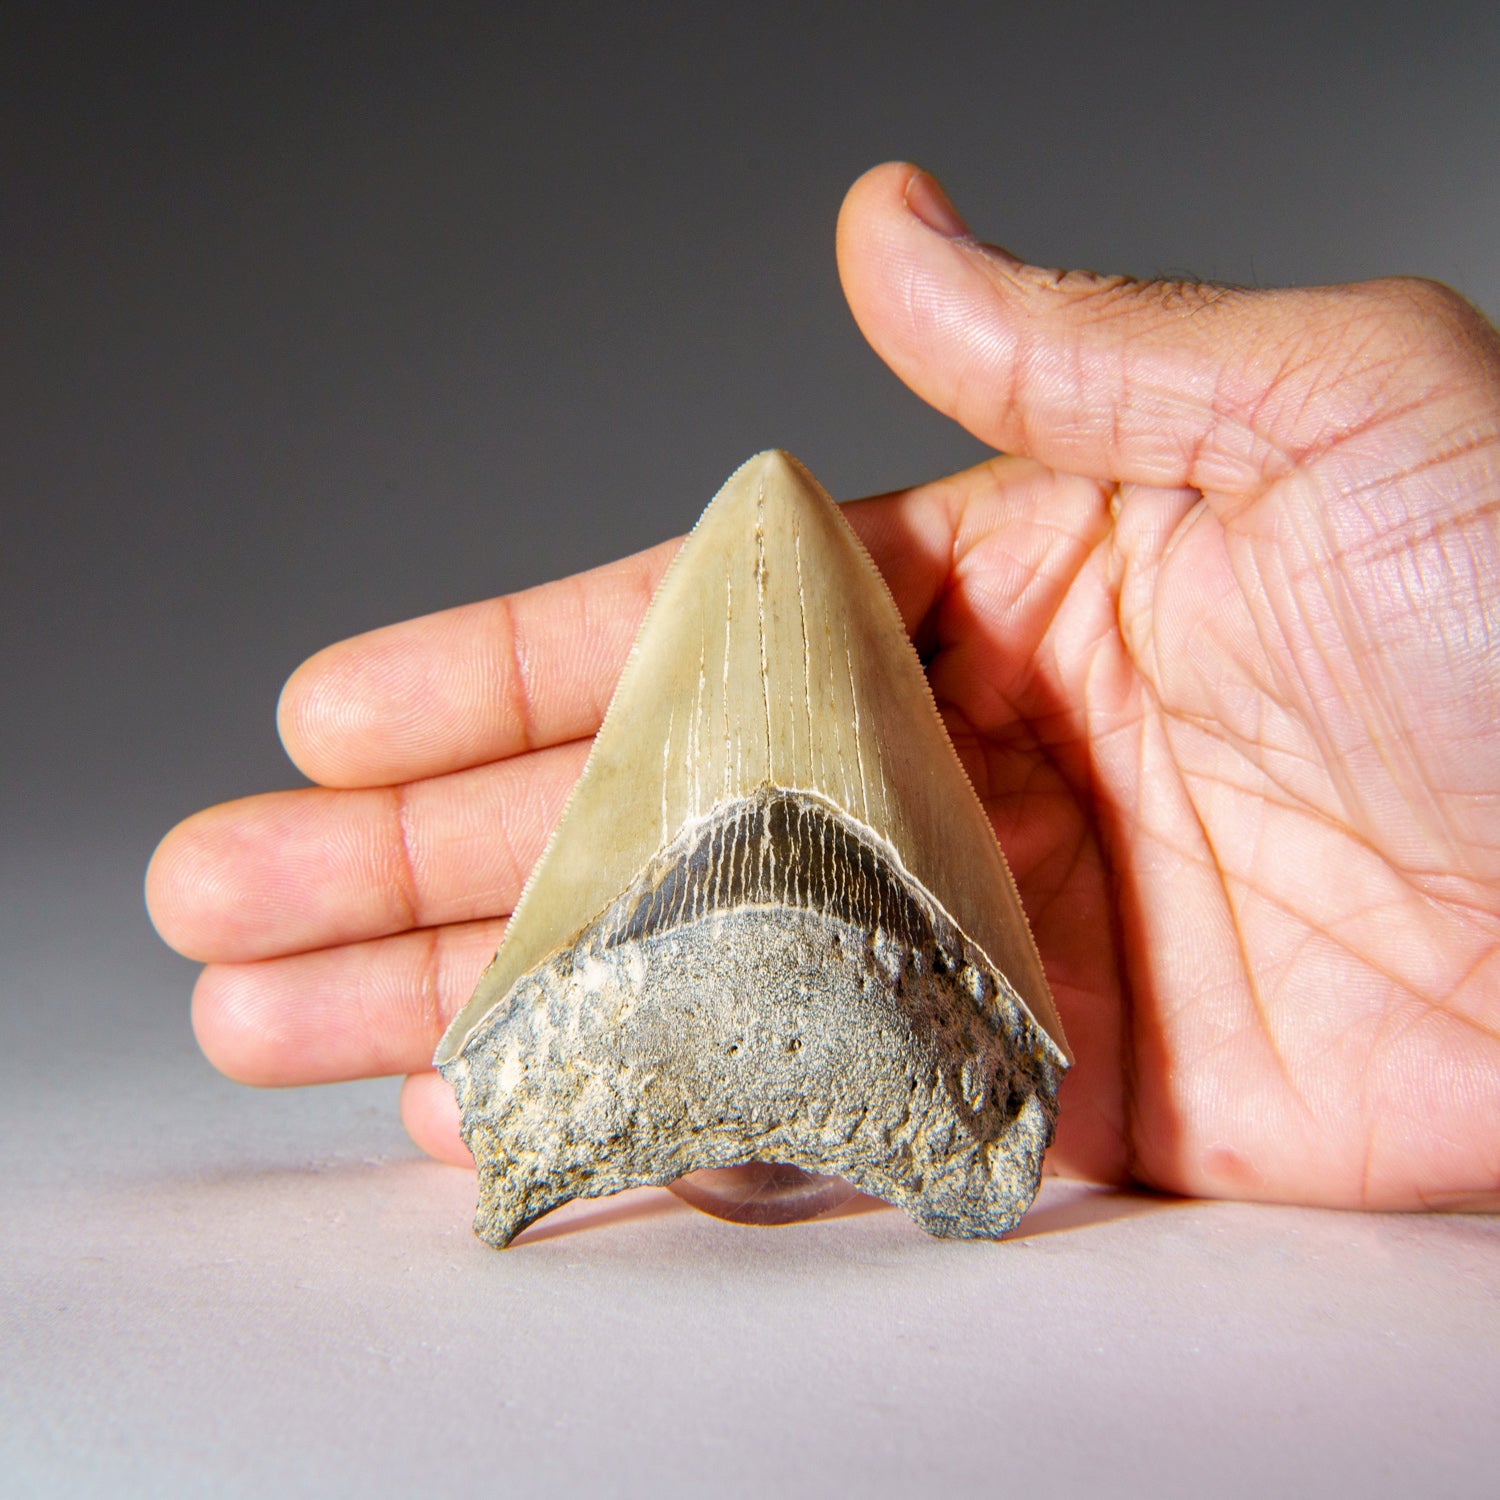 Genuine Natural Pre Historic Shark Tooth Shark Tooth (84.3 grams)